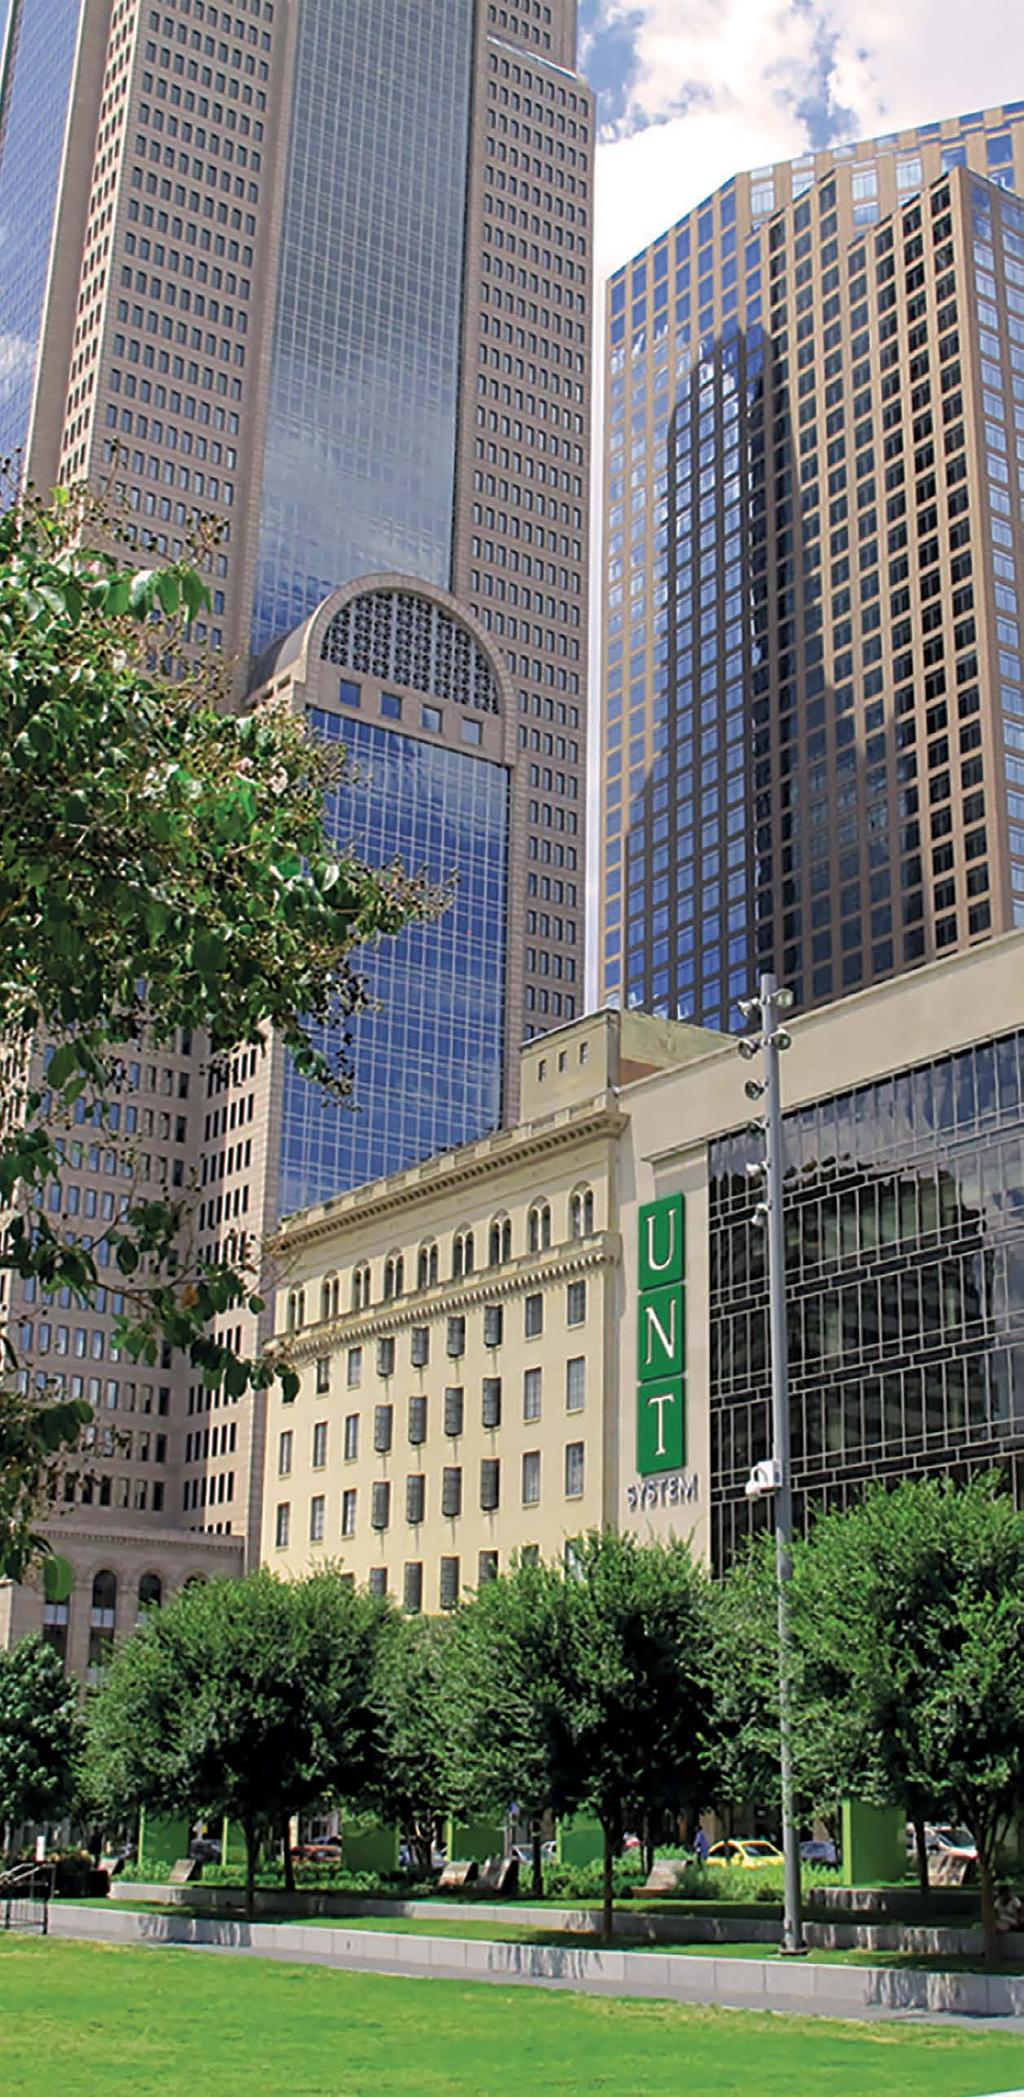 LOCATION, FACILITIES AND NEW PLANS The College of Law is currently located in downtown Dallas, at 1901 Main Street, in the same building with the UNT System offices.